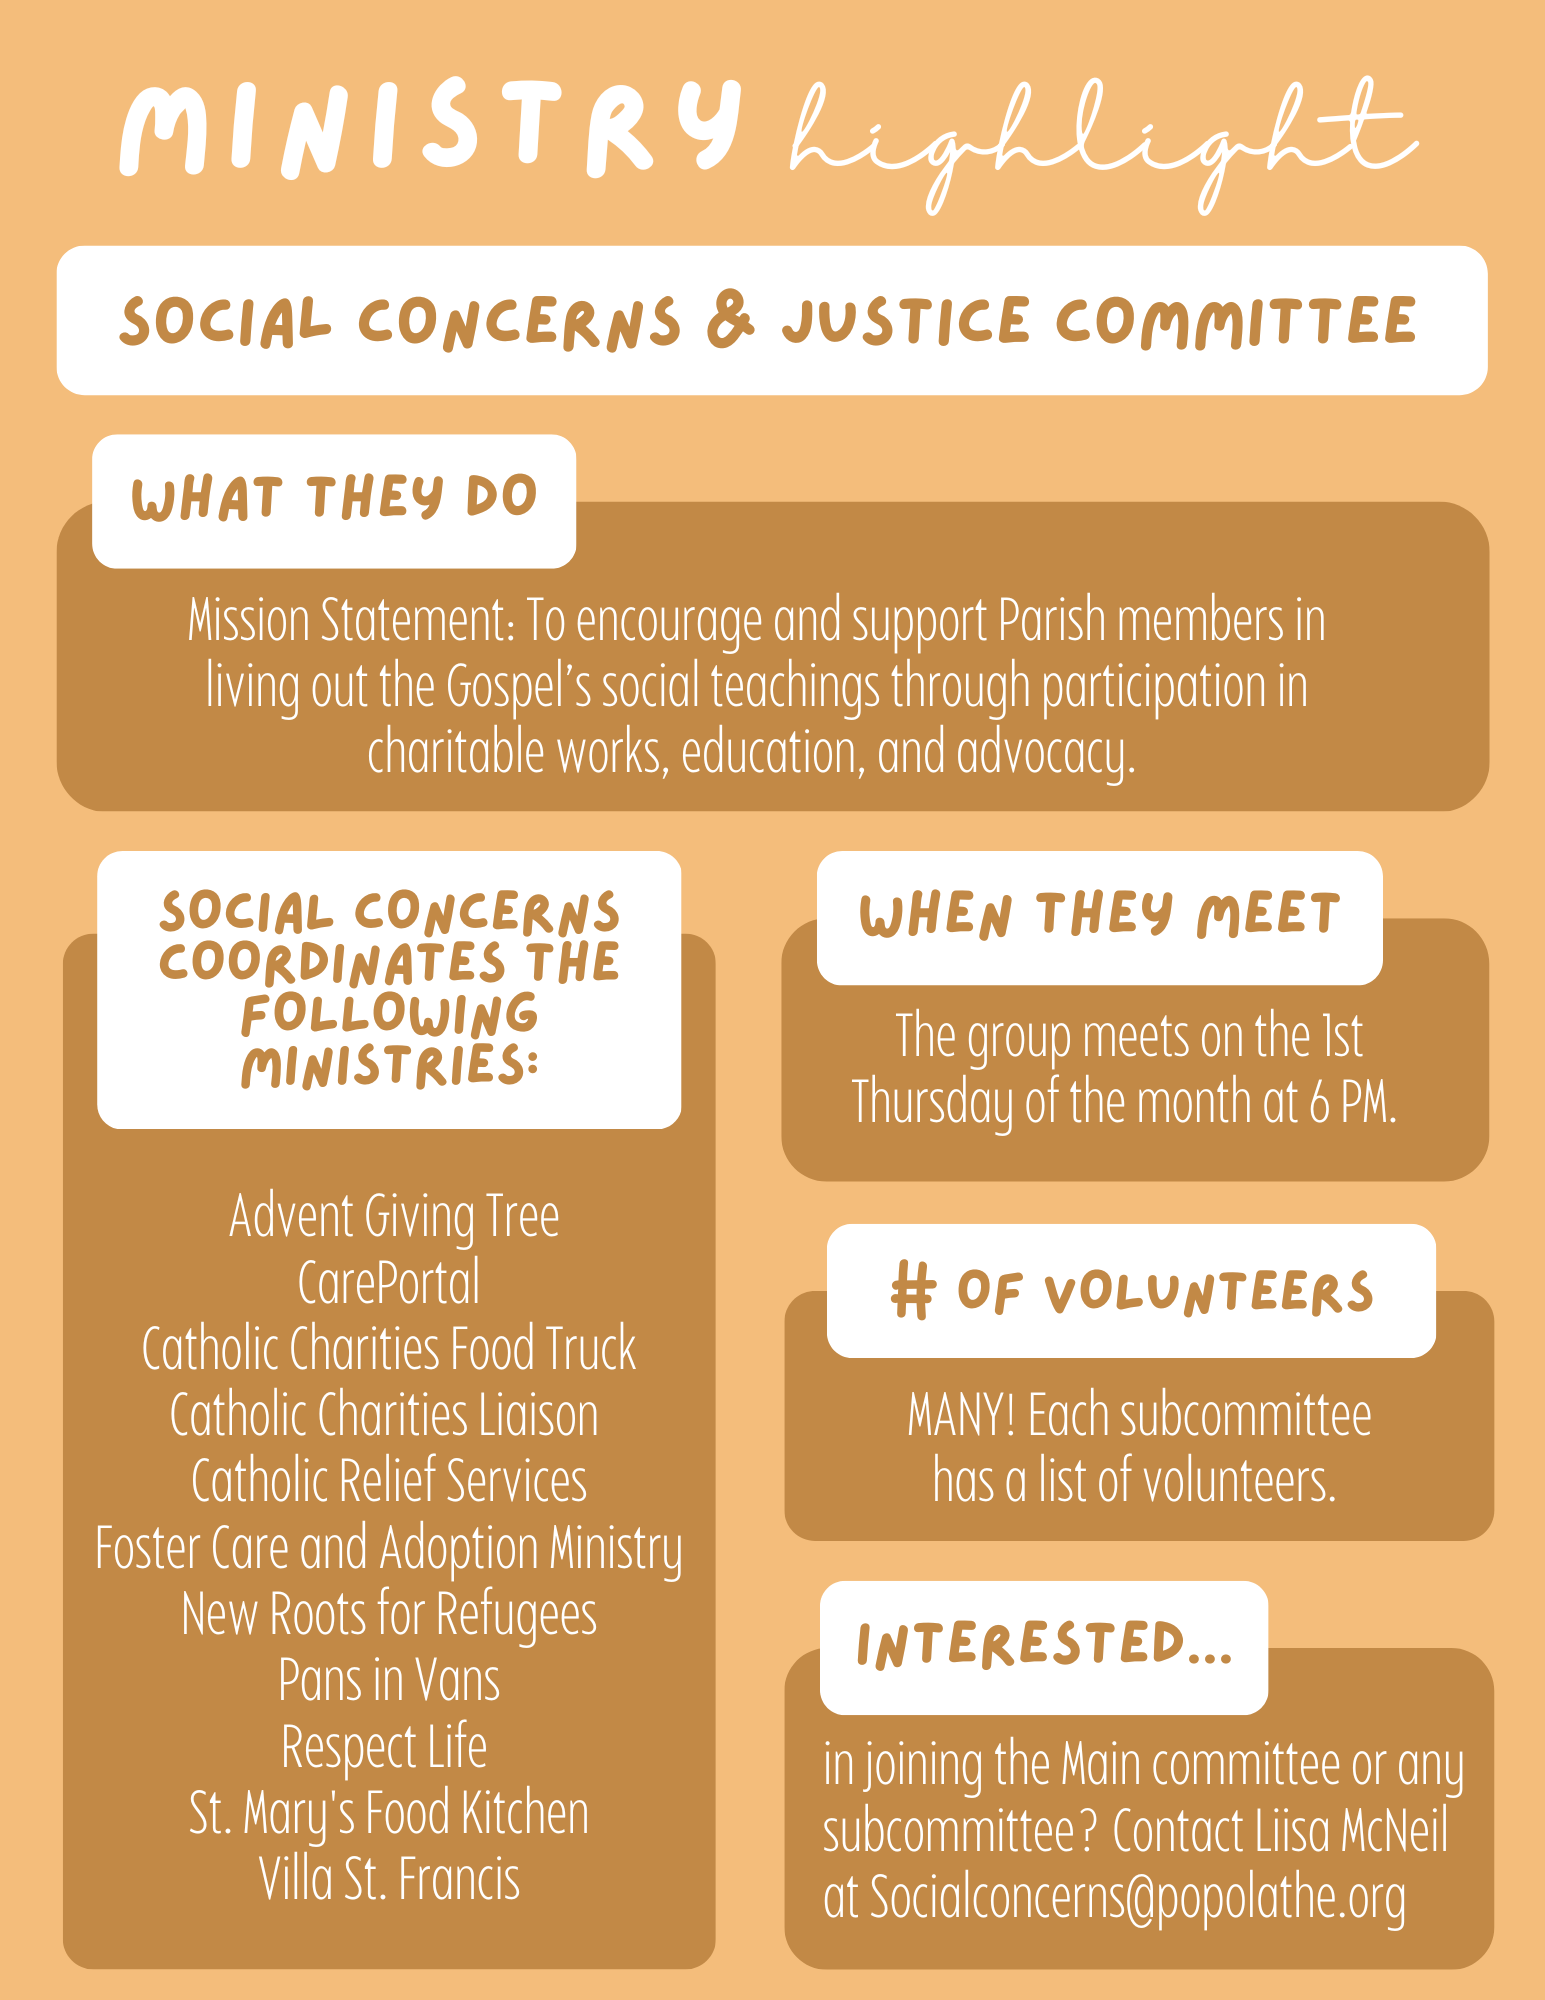 Ministry highlight for social concerns & justice committee